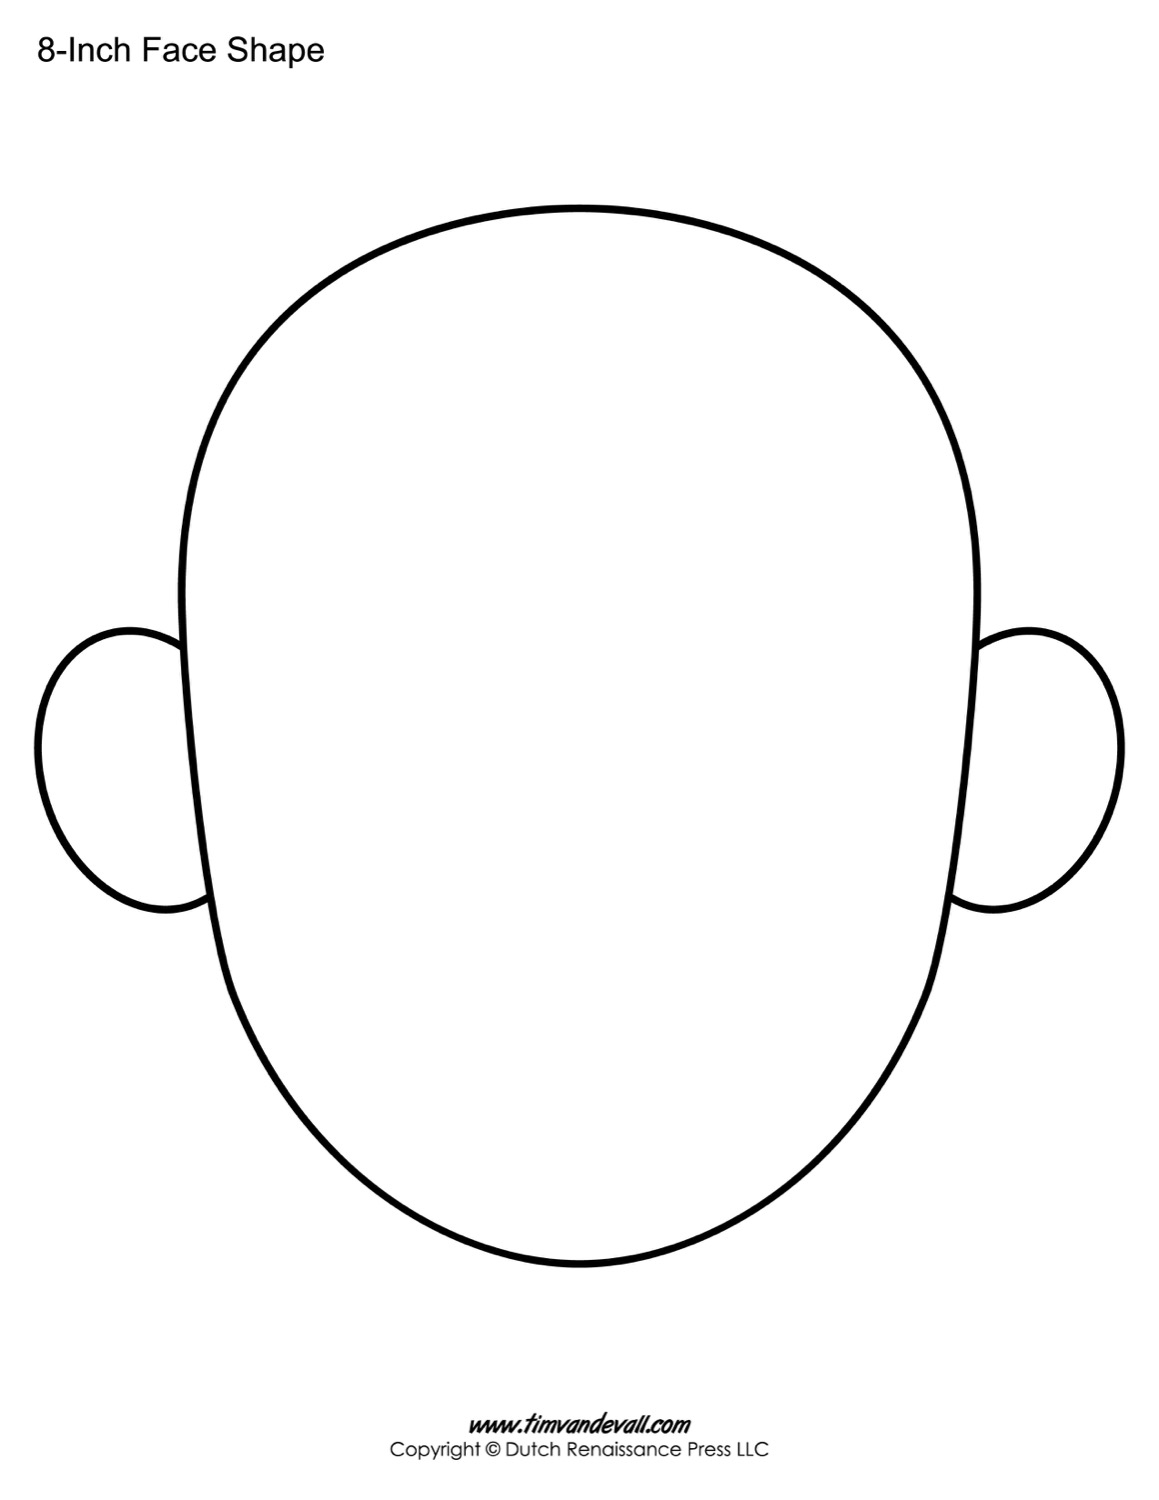 Blank Face Templates Printable Face Shapes for Kids